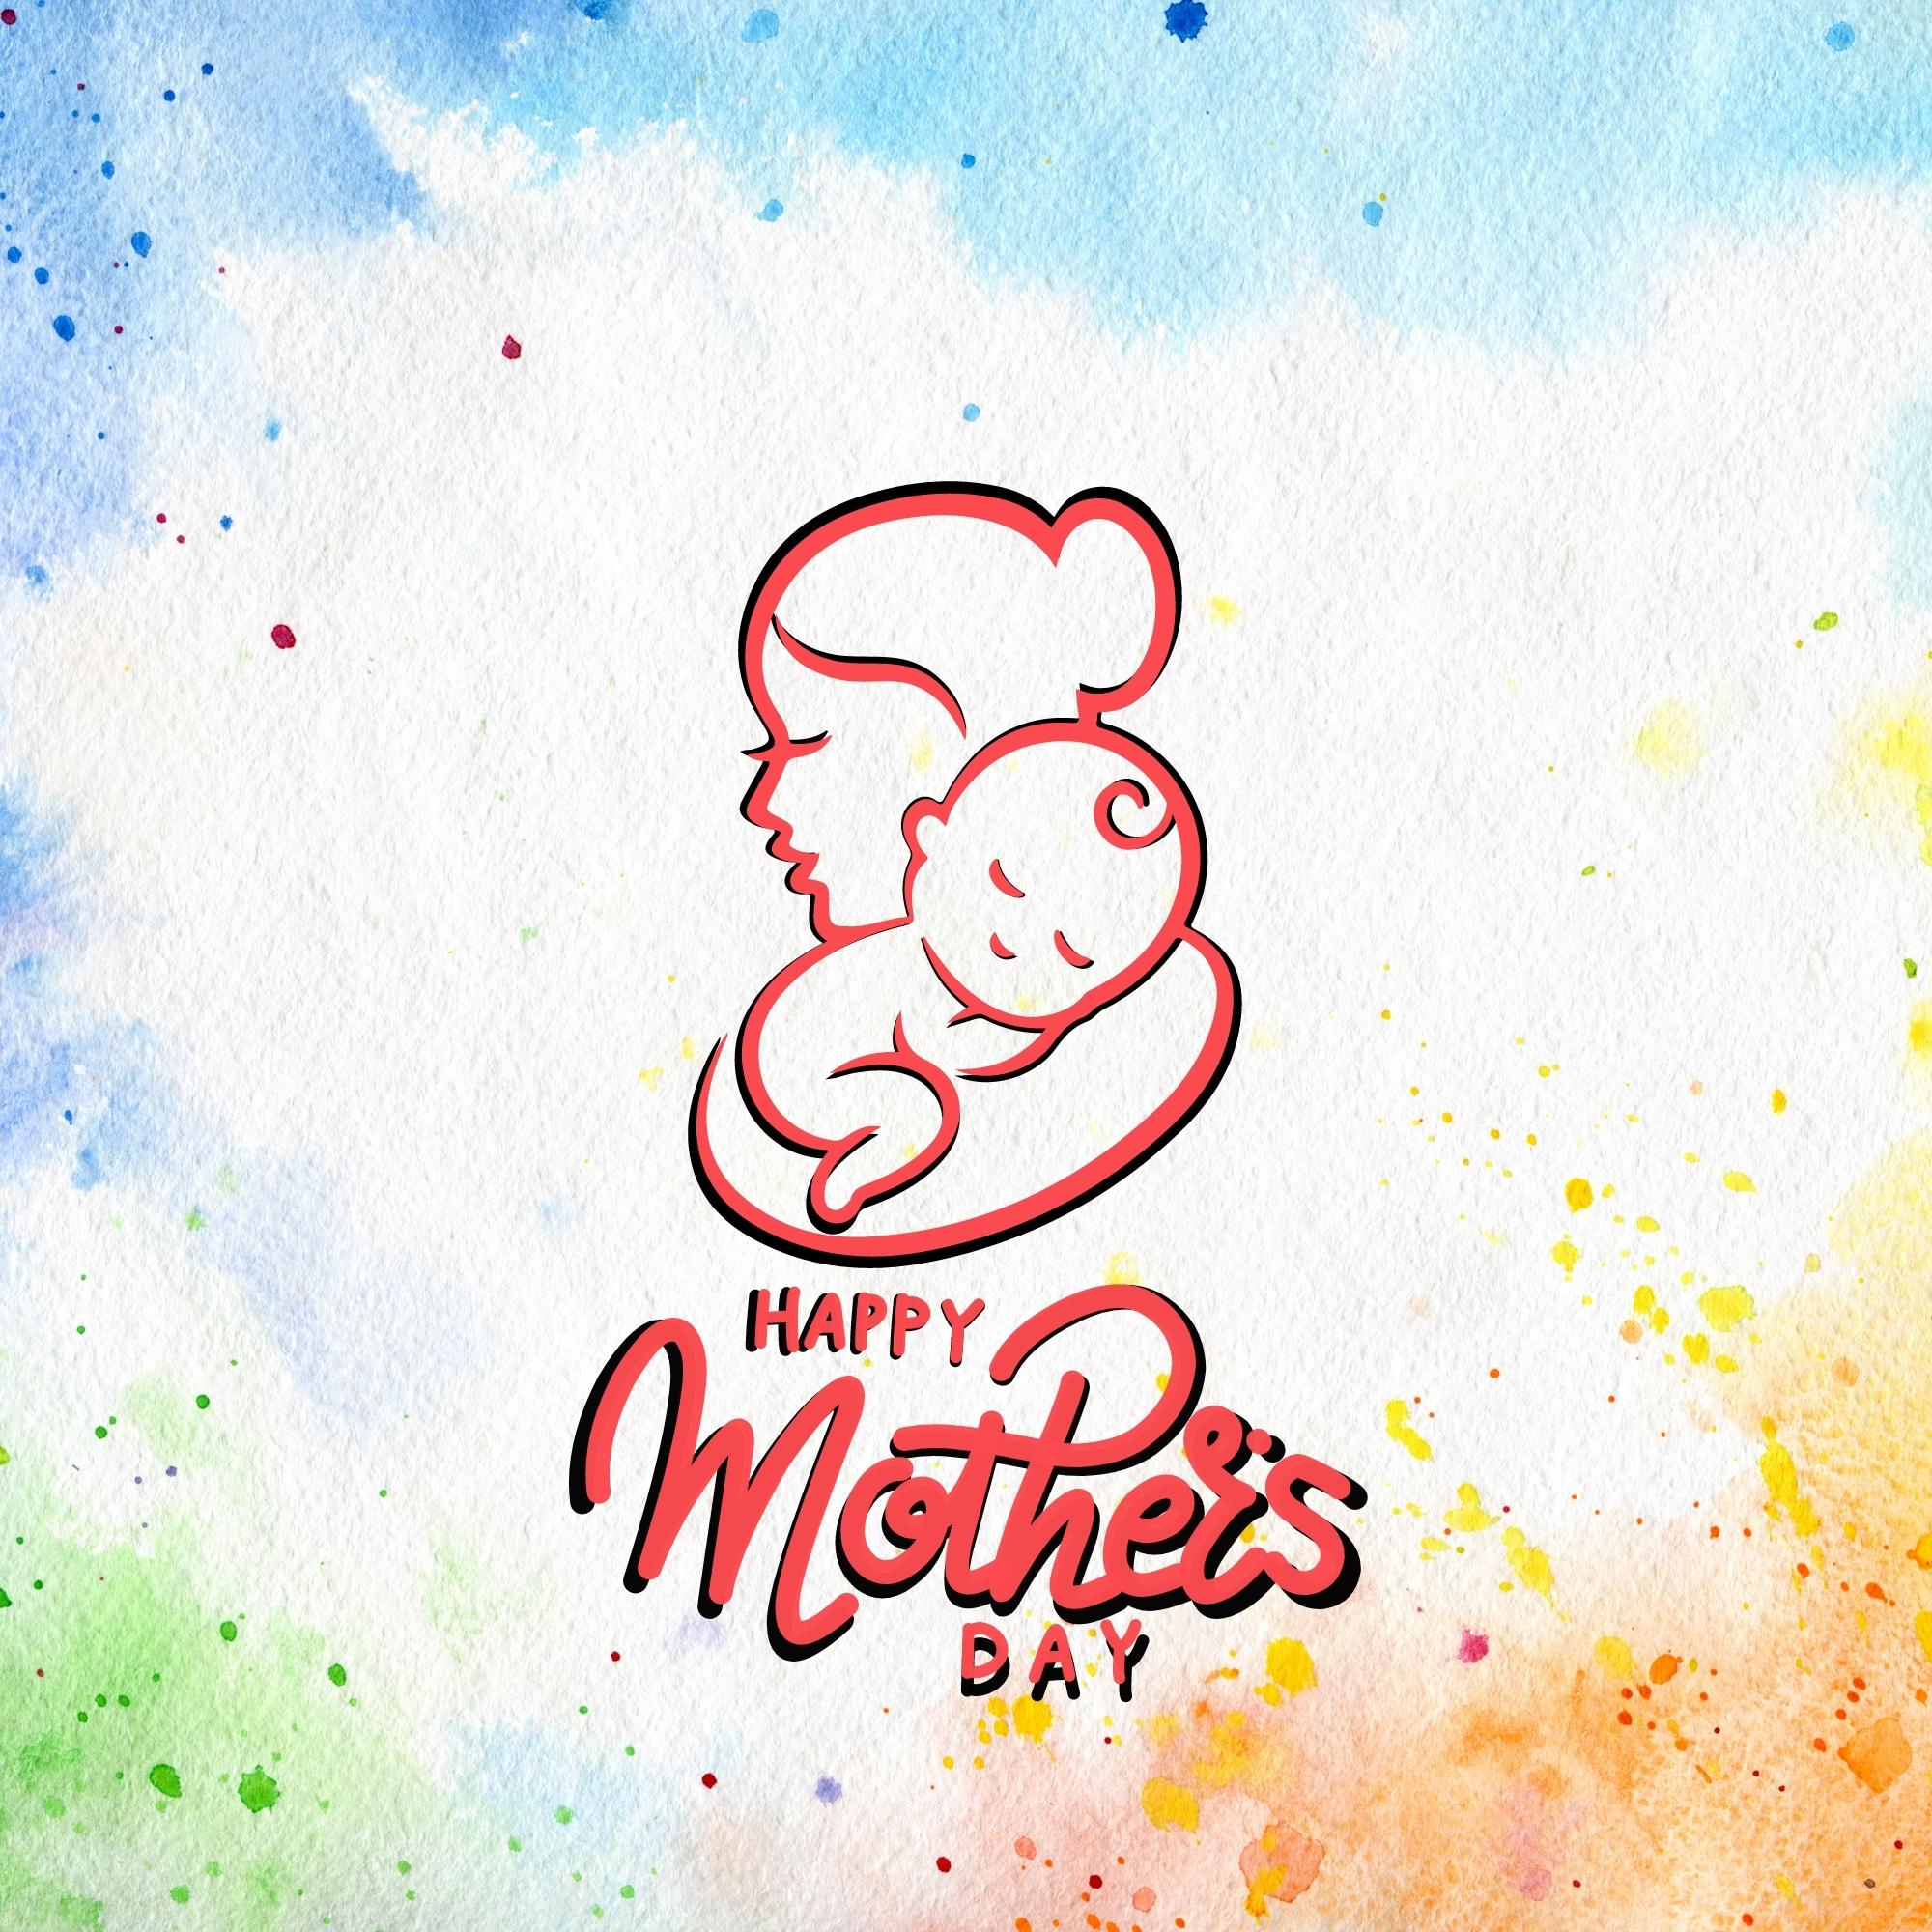 Happy Mothers Day Images | 995 | Free Download [8k,4k,Hd]